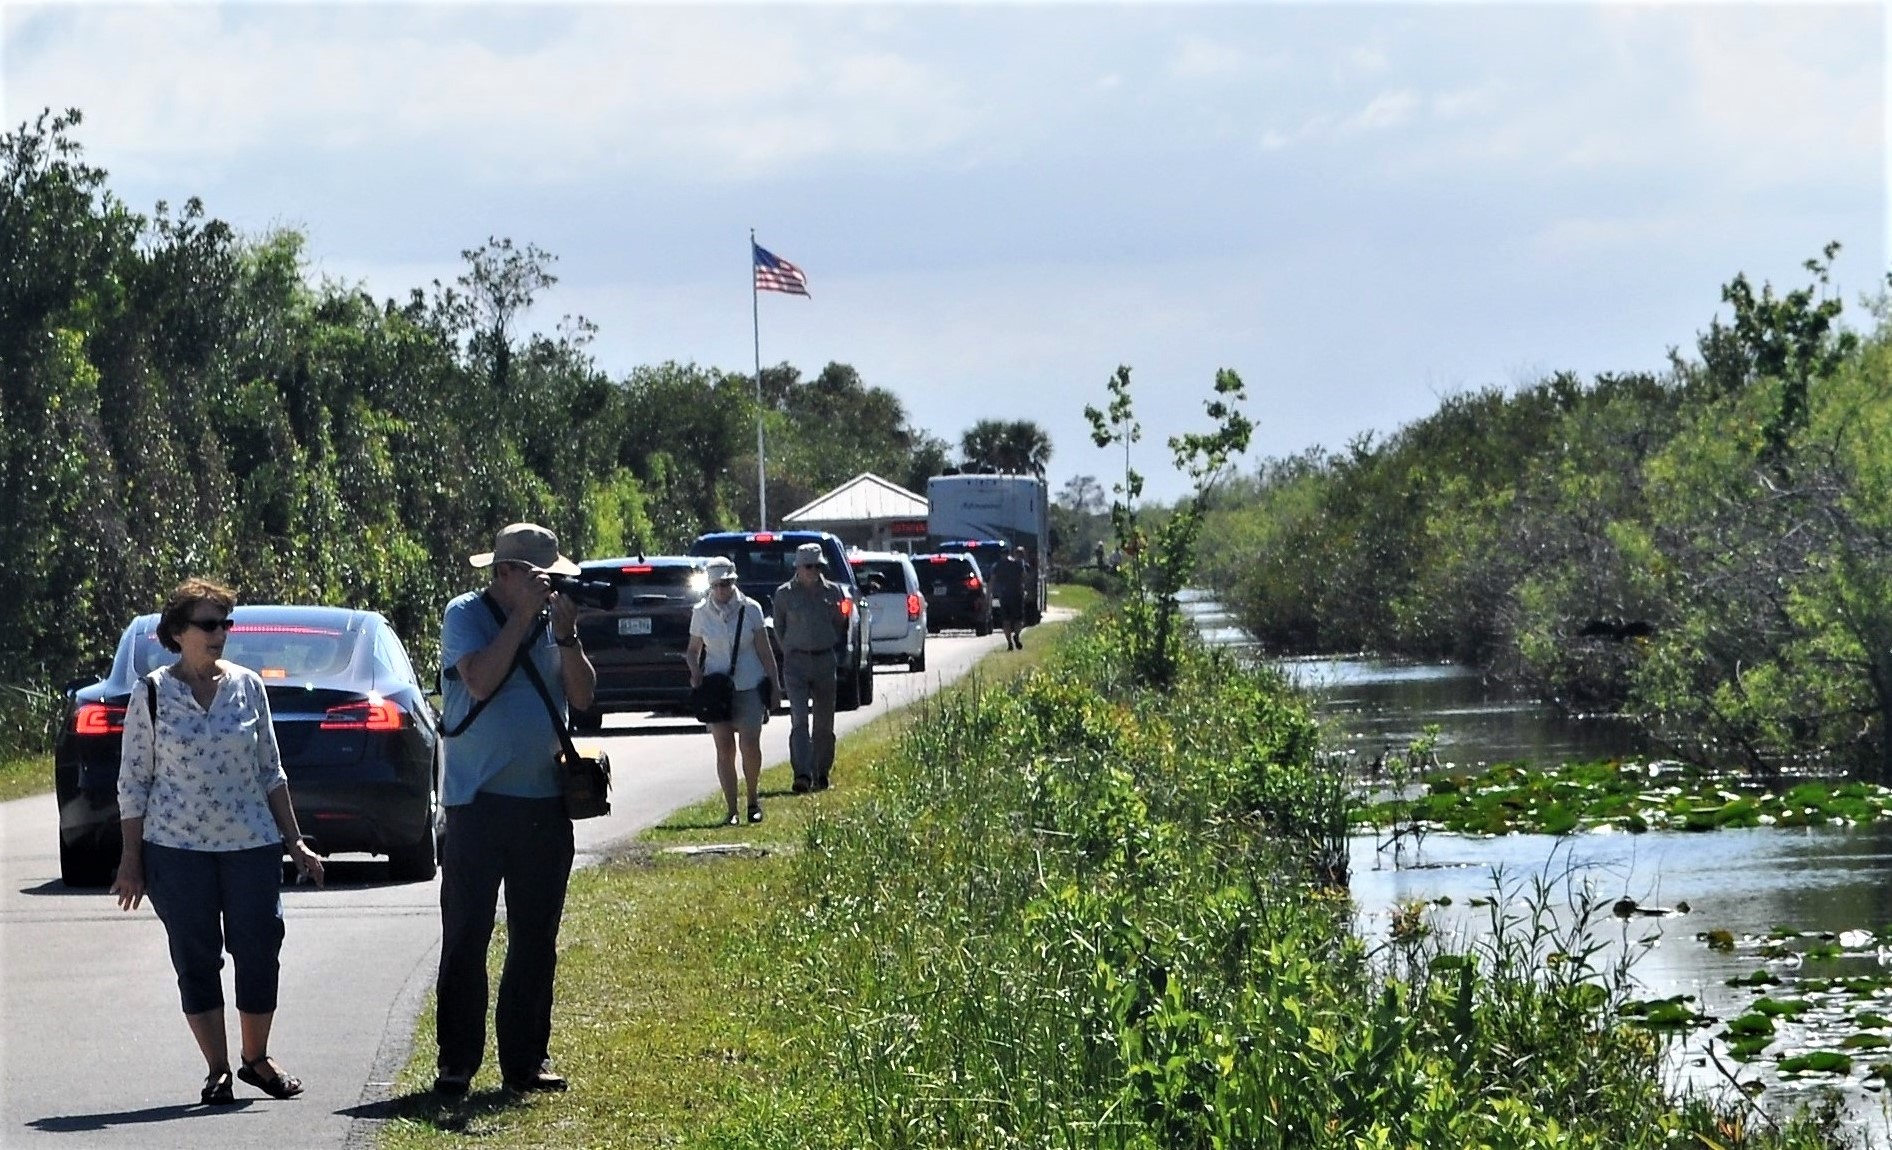 A line of cars waits at the entrance booth with an American flag flying above, while visitors stop along the road to take photographs of the adjacent canal with vegetation.